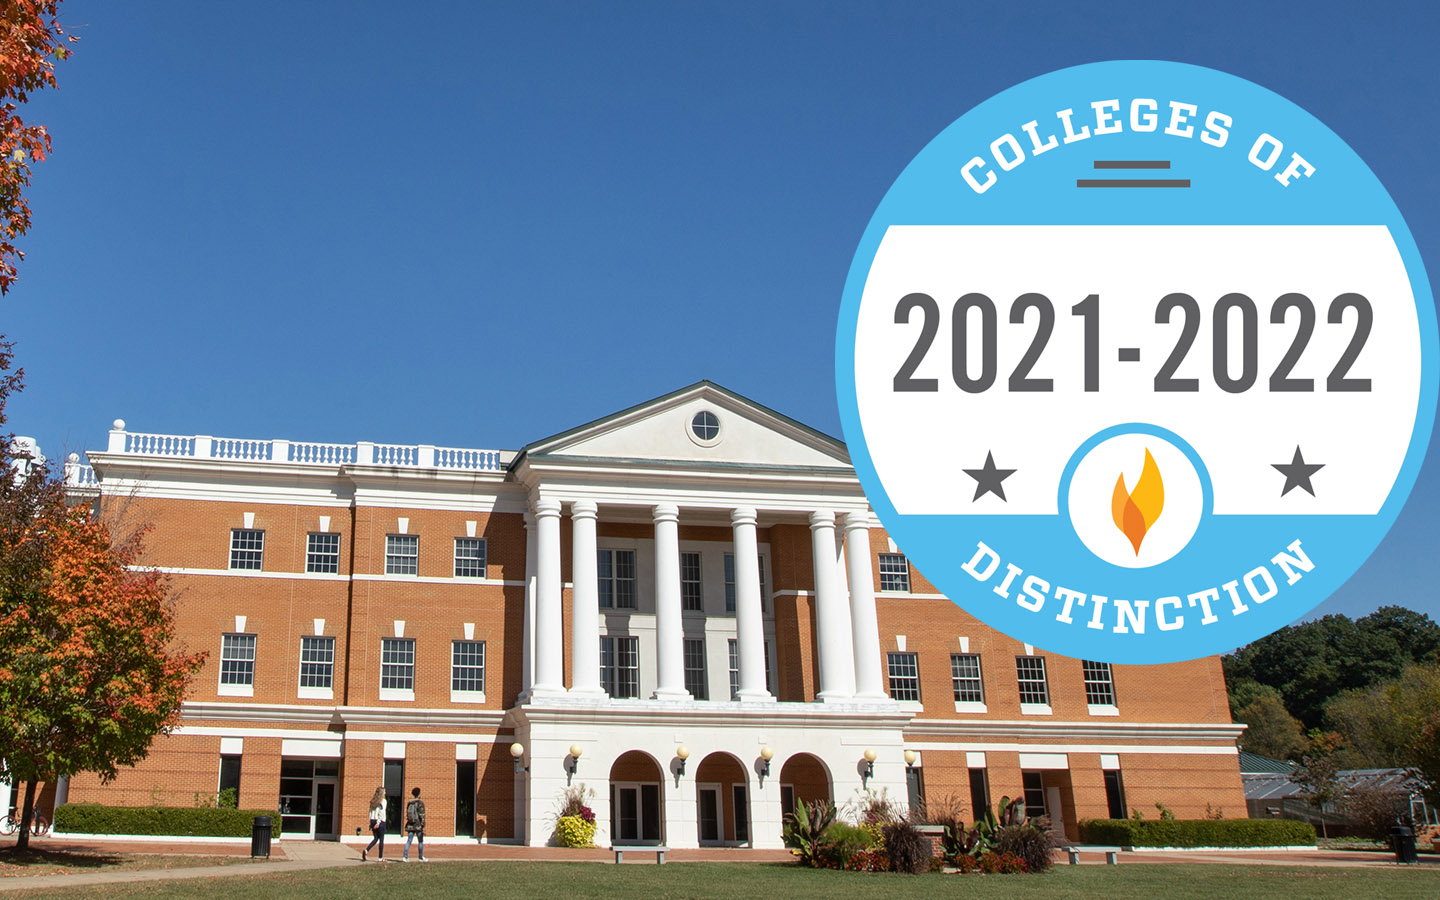 A photo of the McKinney building appears with the 2021-2022 colleges of distinction logo